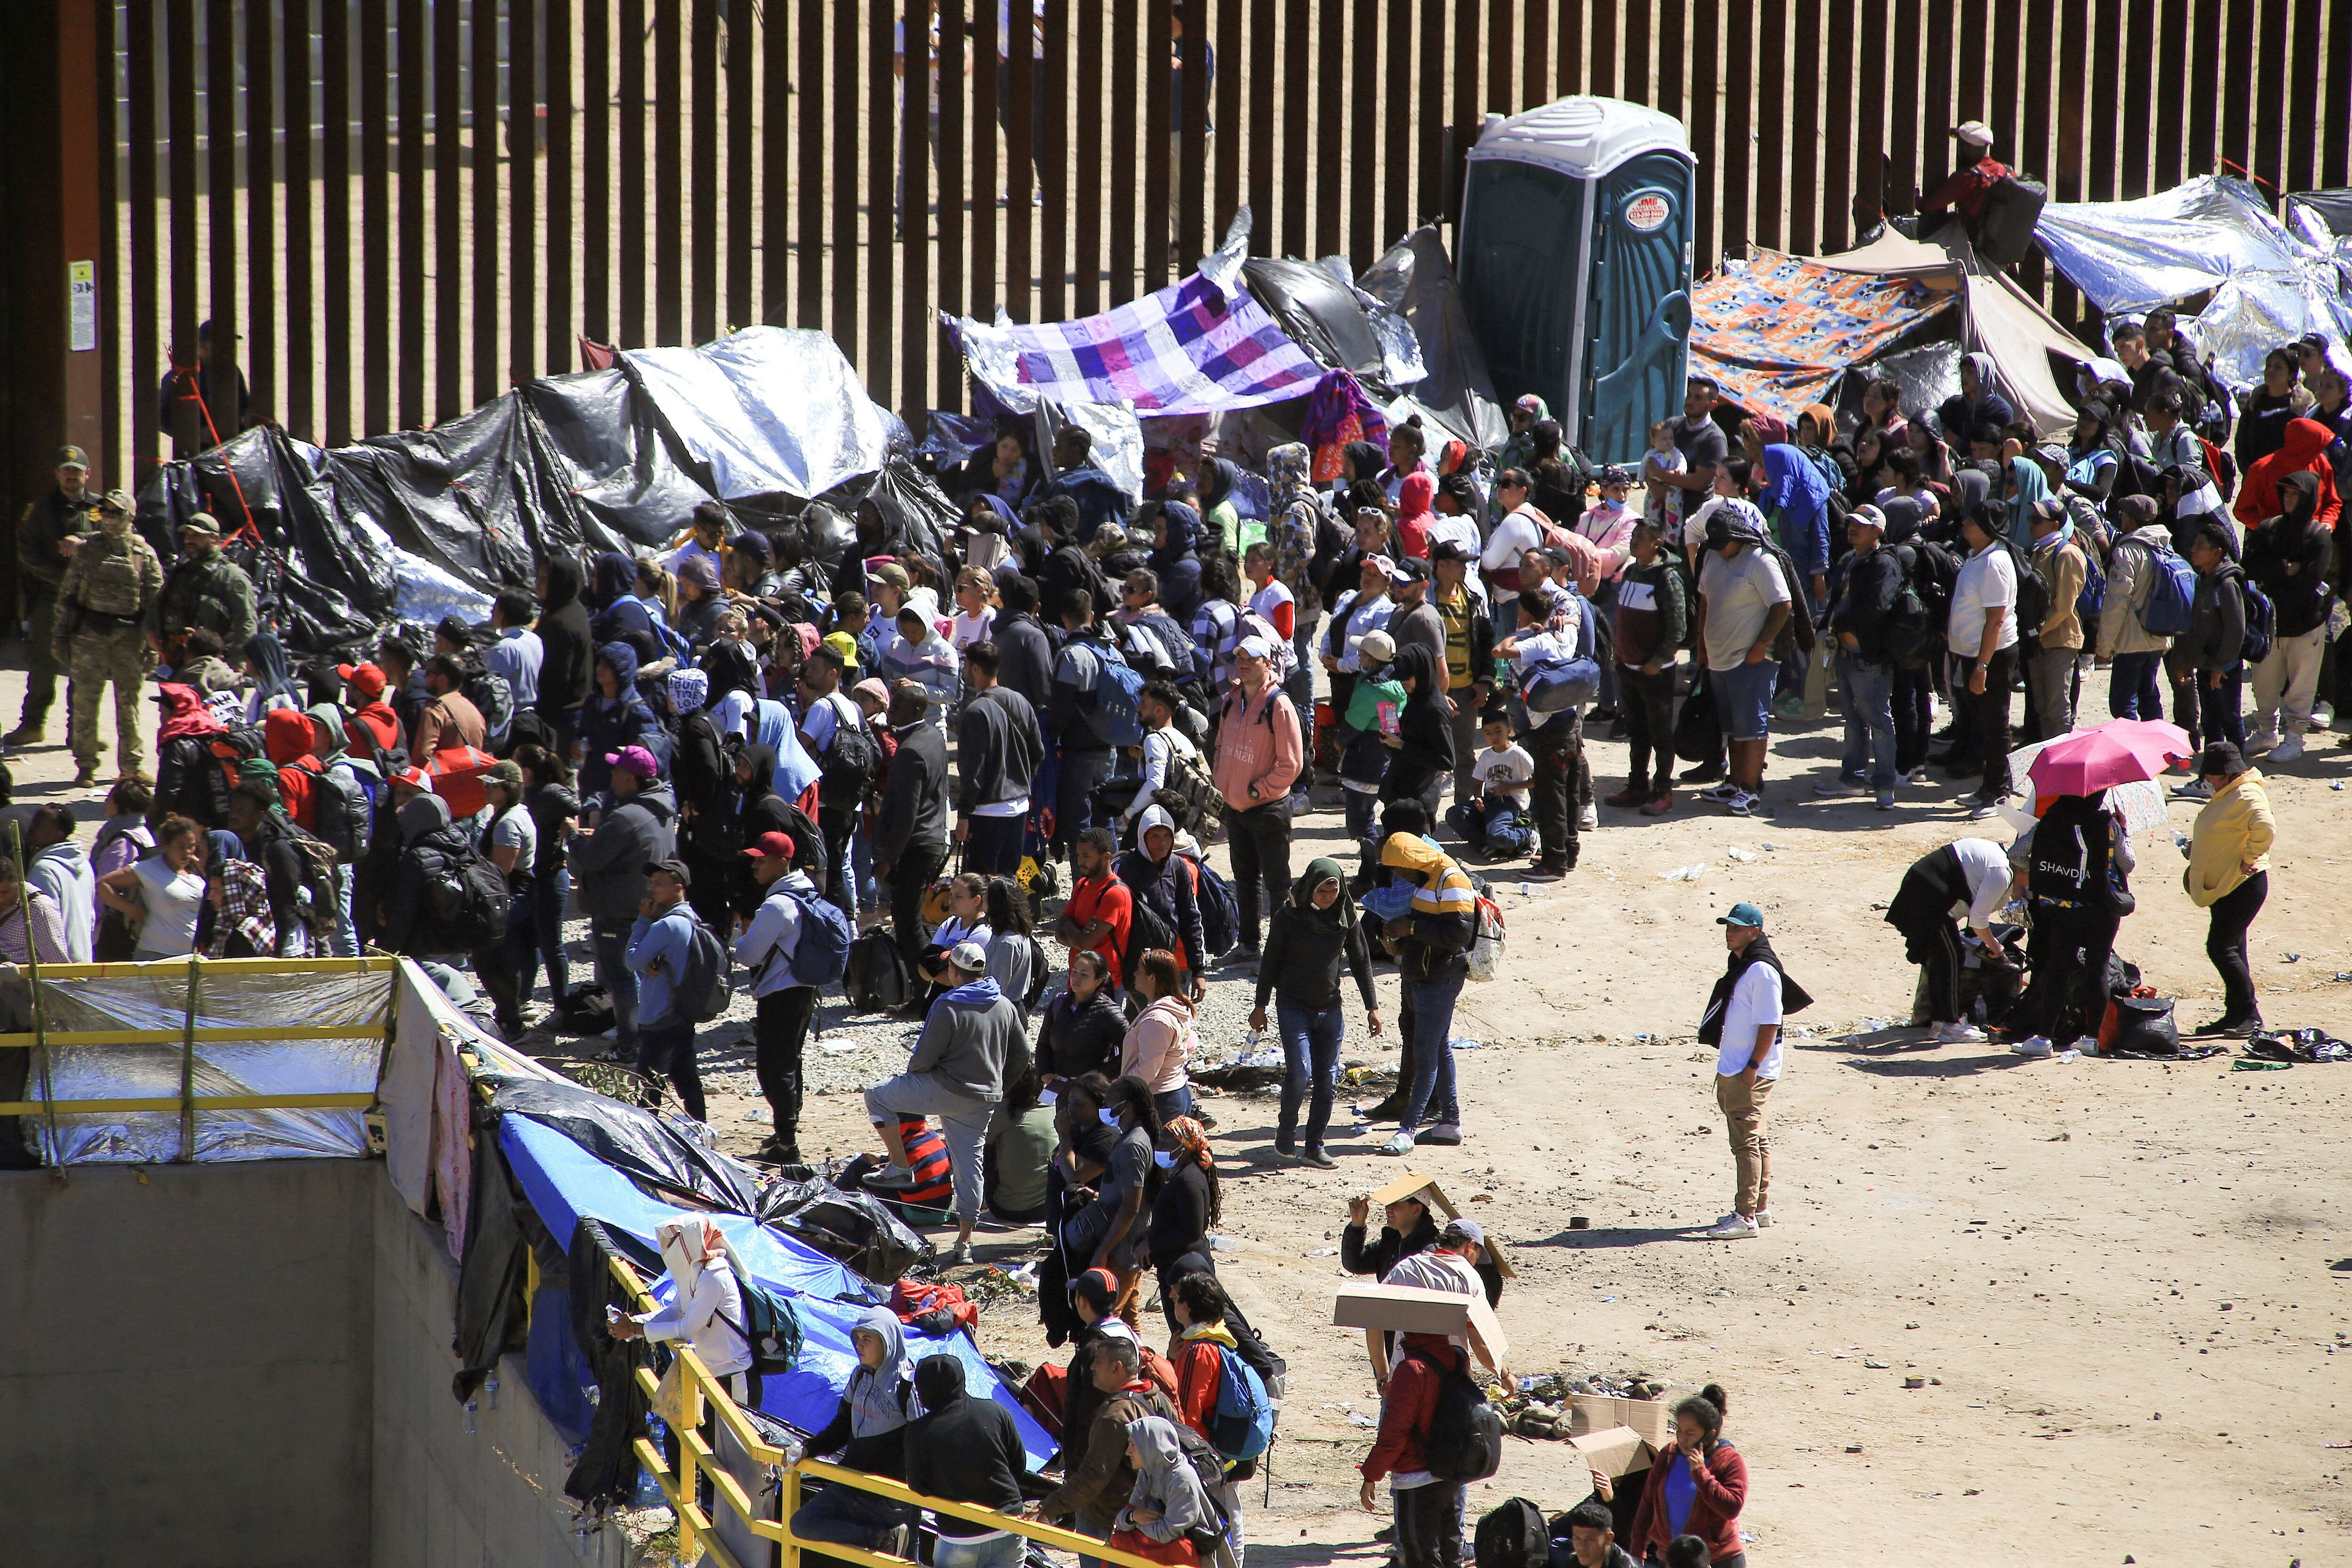 Large groups of migrants also register at the San Diego border crossing before the policy changes.